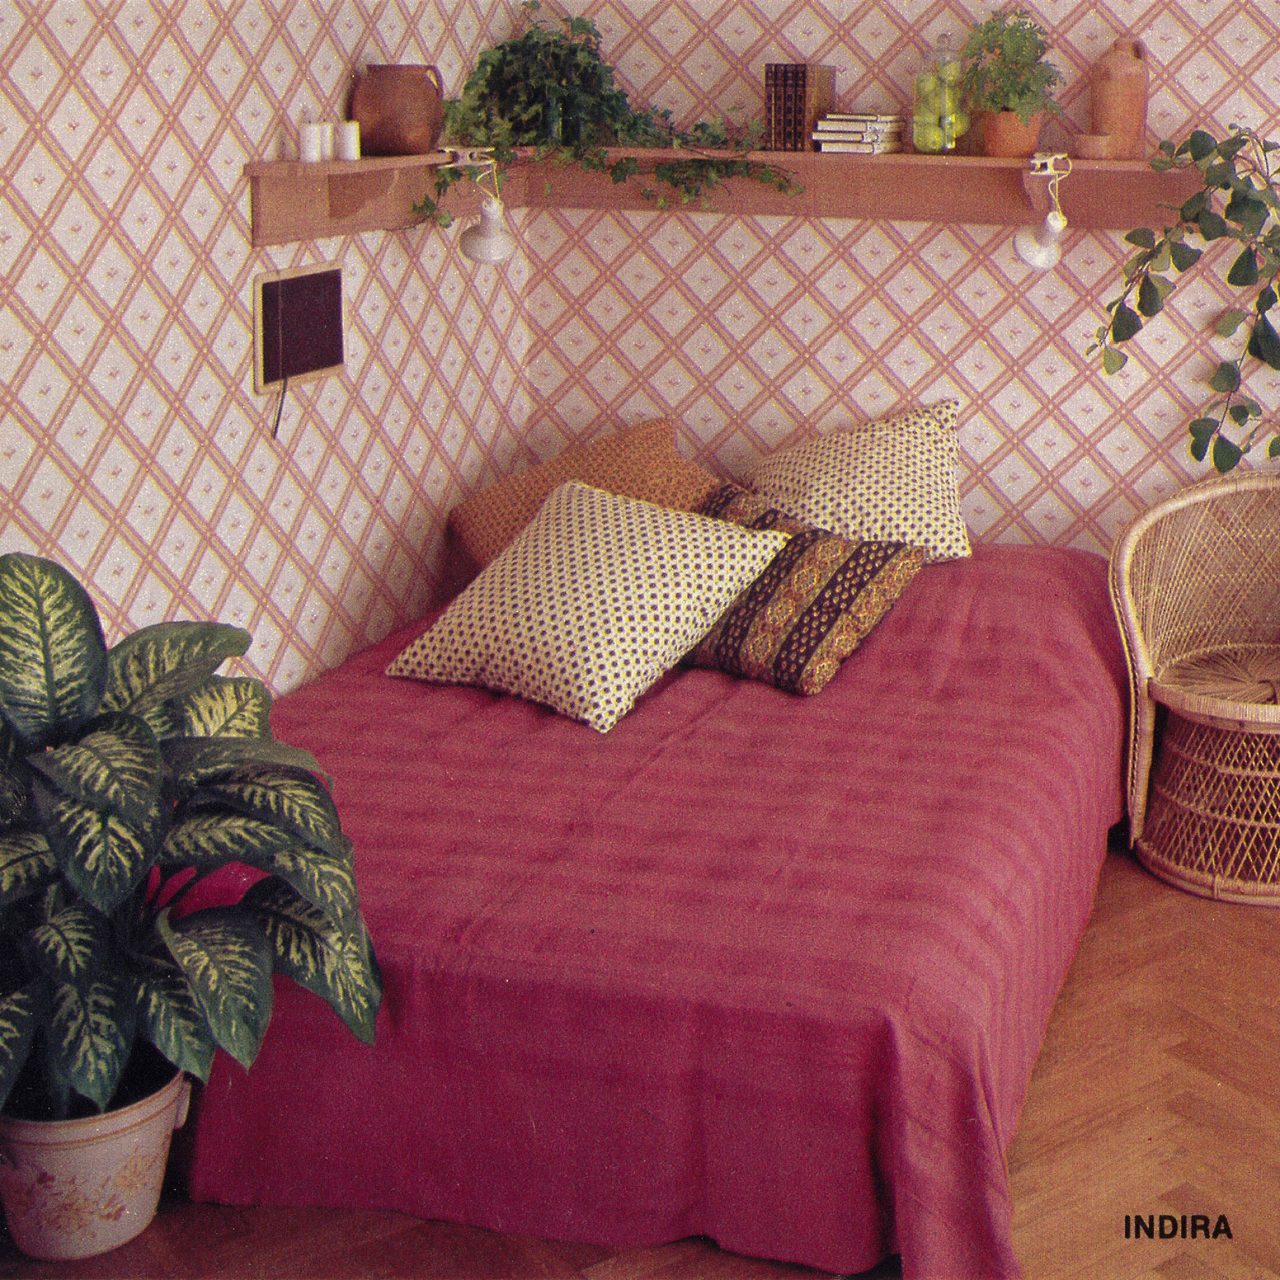 1979 IKEA catalogue bedroom image with a wooden bed, dark pink INDIRA bedspread, and graphic patterned STRAM wallpaper.